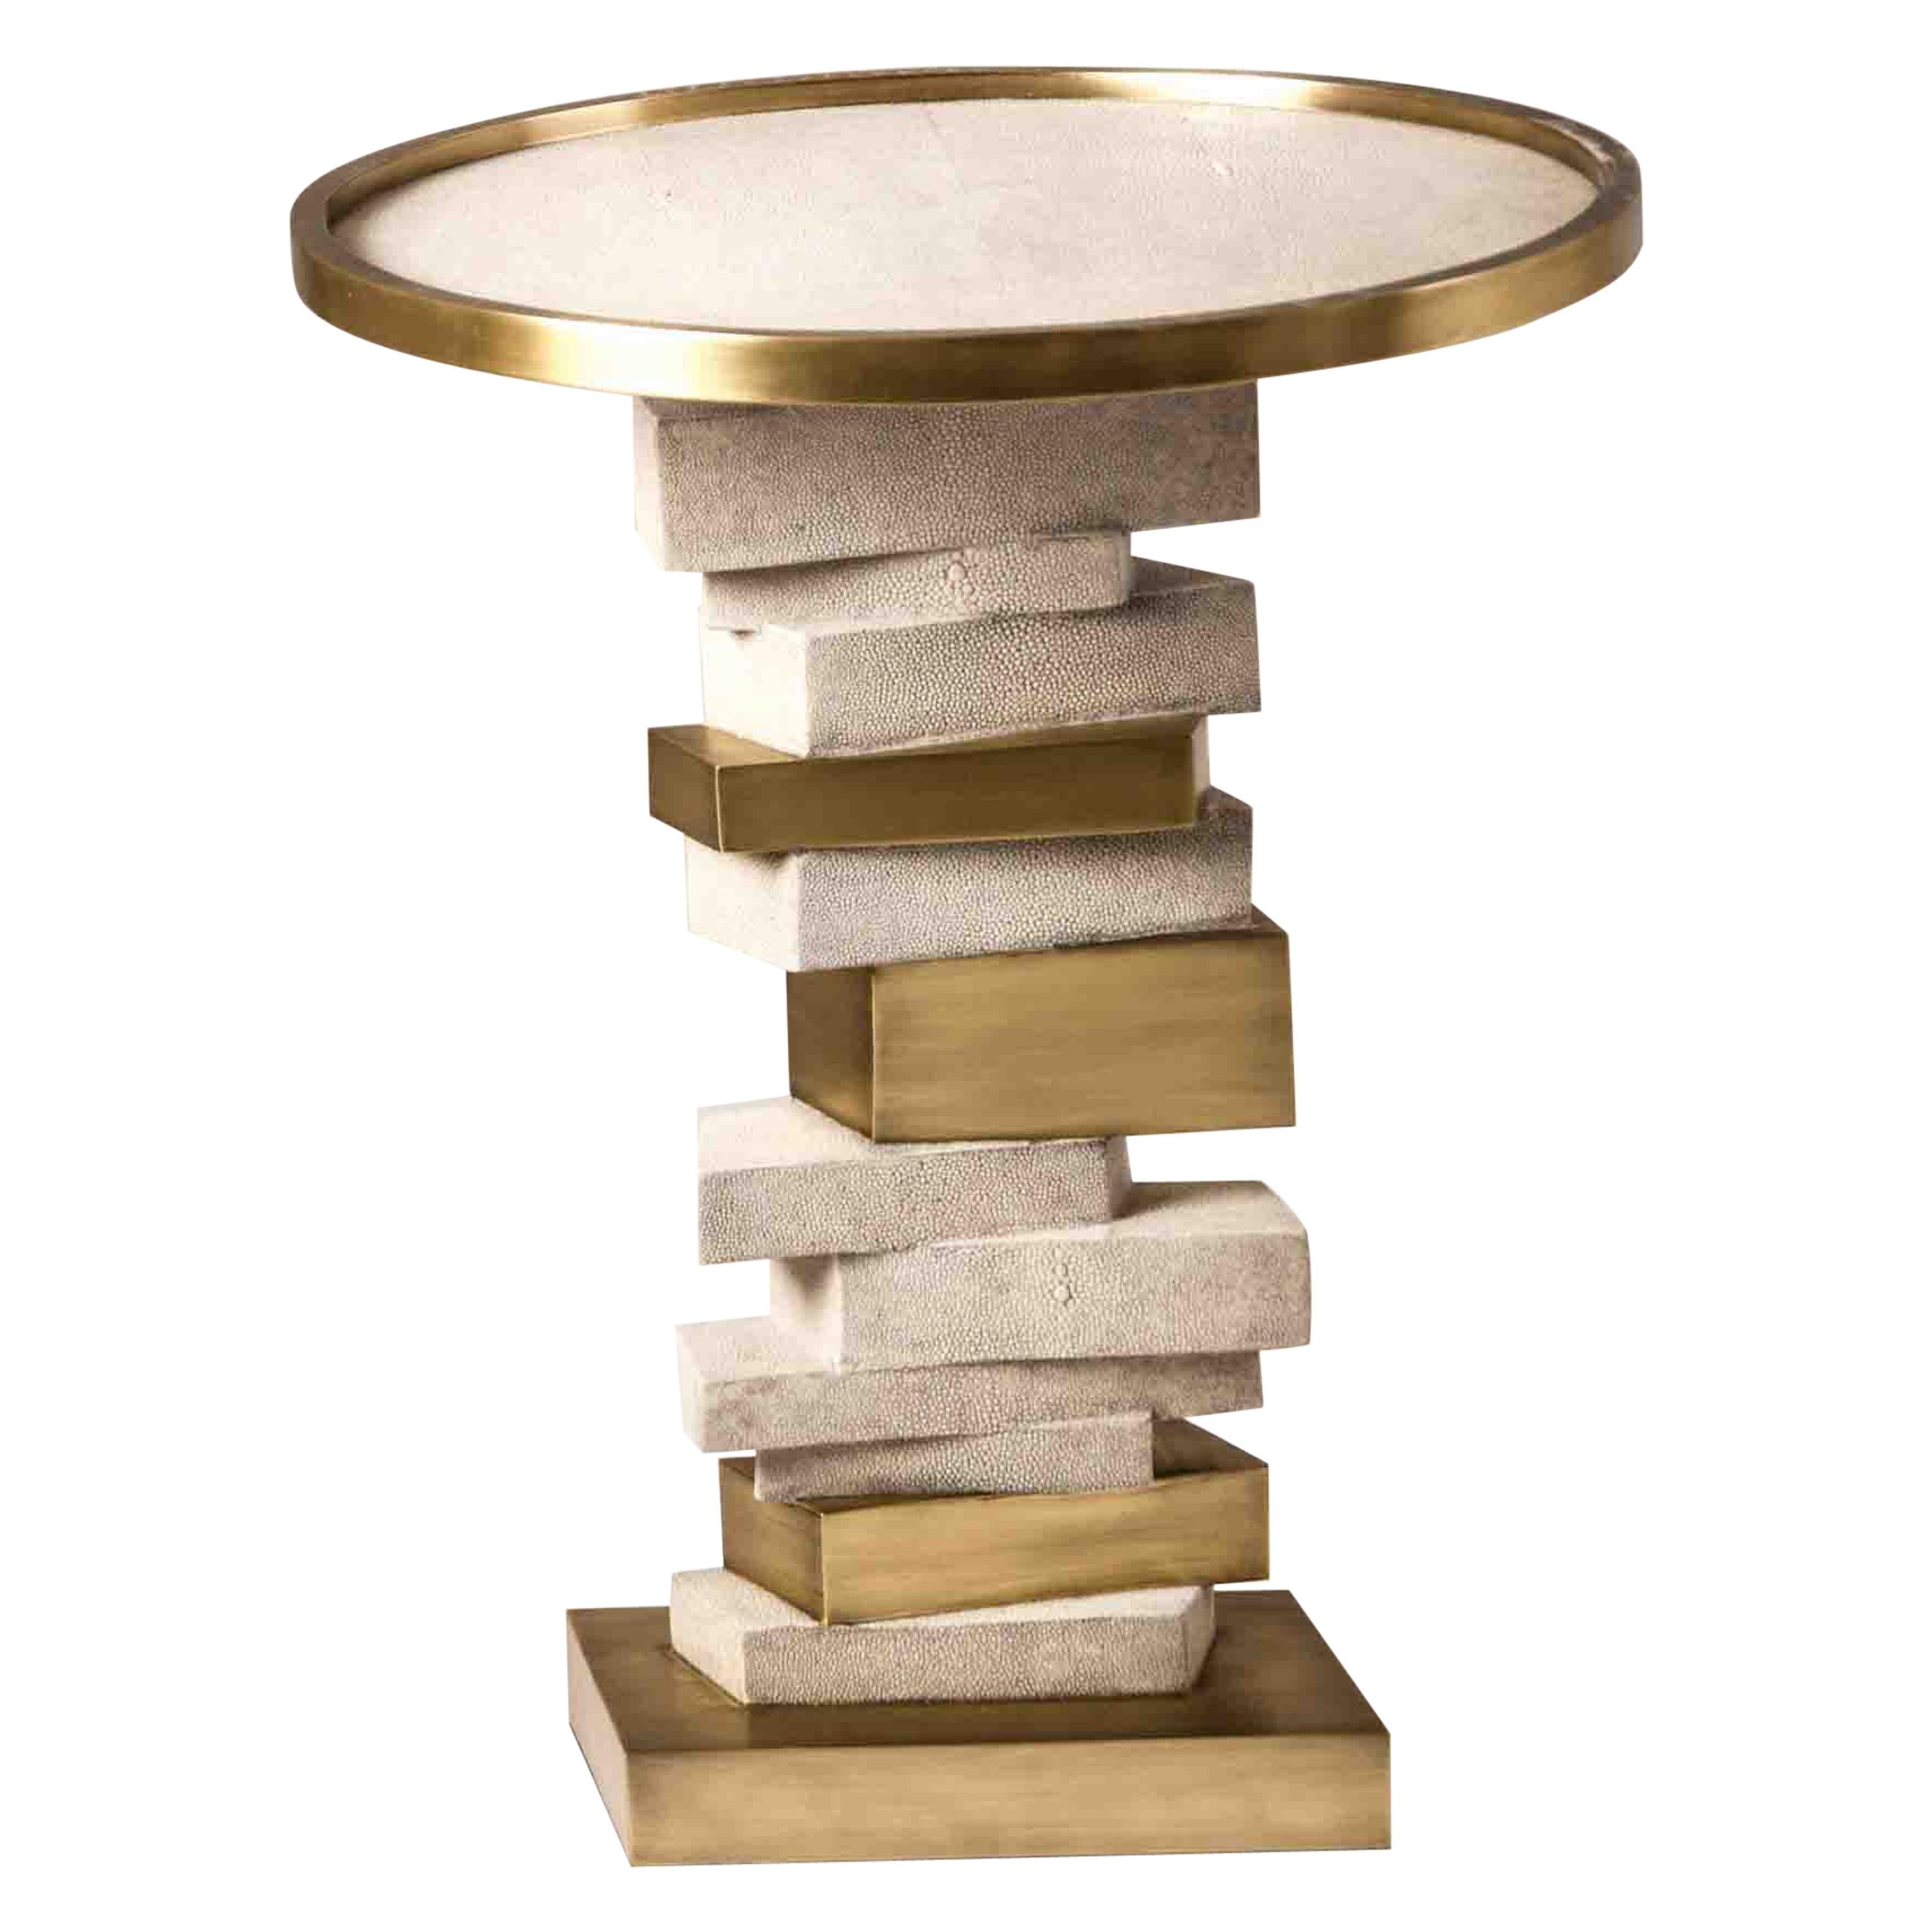 The Bullion side table is inspired by stacked gold bars. The top of the table is inlaid in black shagreen with a bronze-patina brass frame. The stacked inspired gold bars are inlaid in a mixture of shagreen and brass. This piece makes for a playful